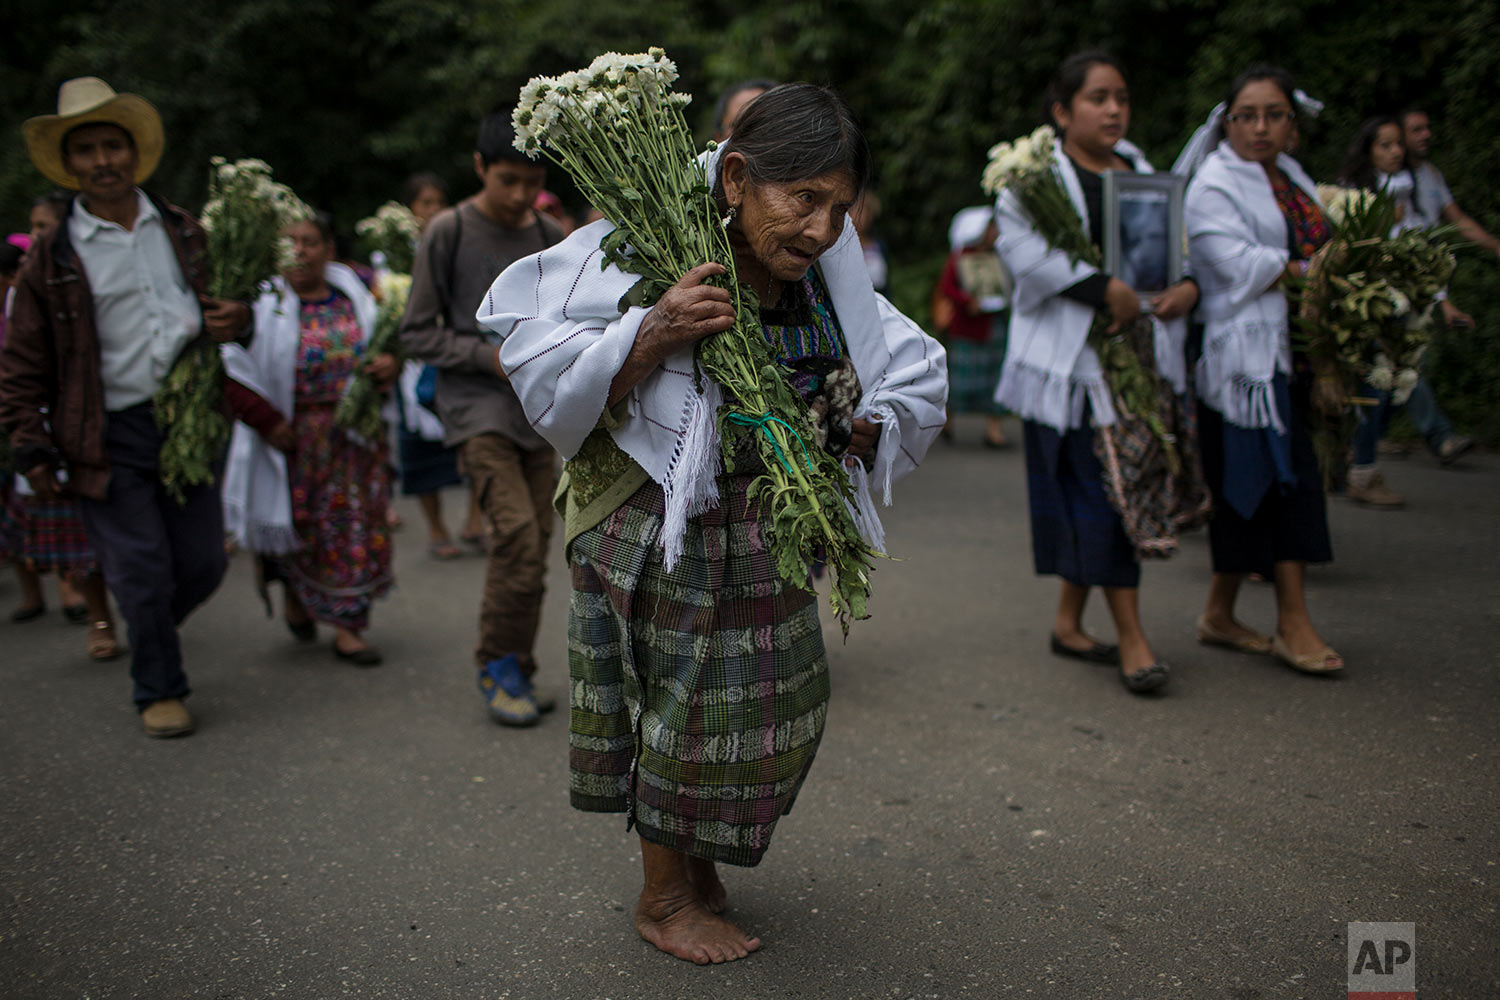  In this June 21, 2018 photo, an elderly woman walks barefoot to what was once a military camp during the funeral procession for 172 unidentified people who were exhumed from the camp and will be properly buried there in San Juan Comalapa, Guatemala.